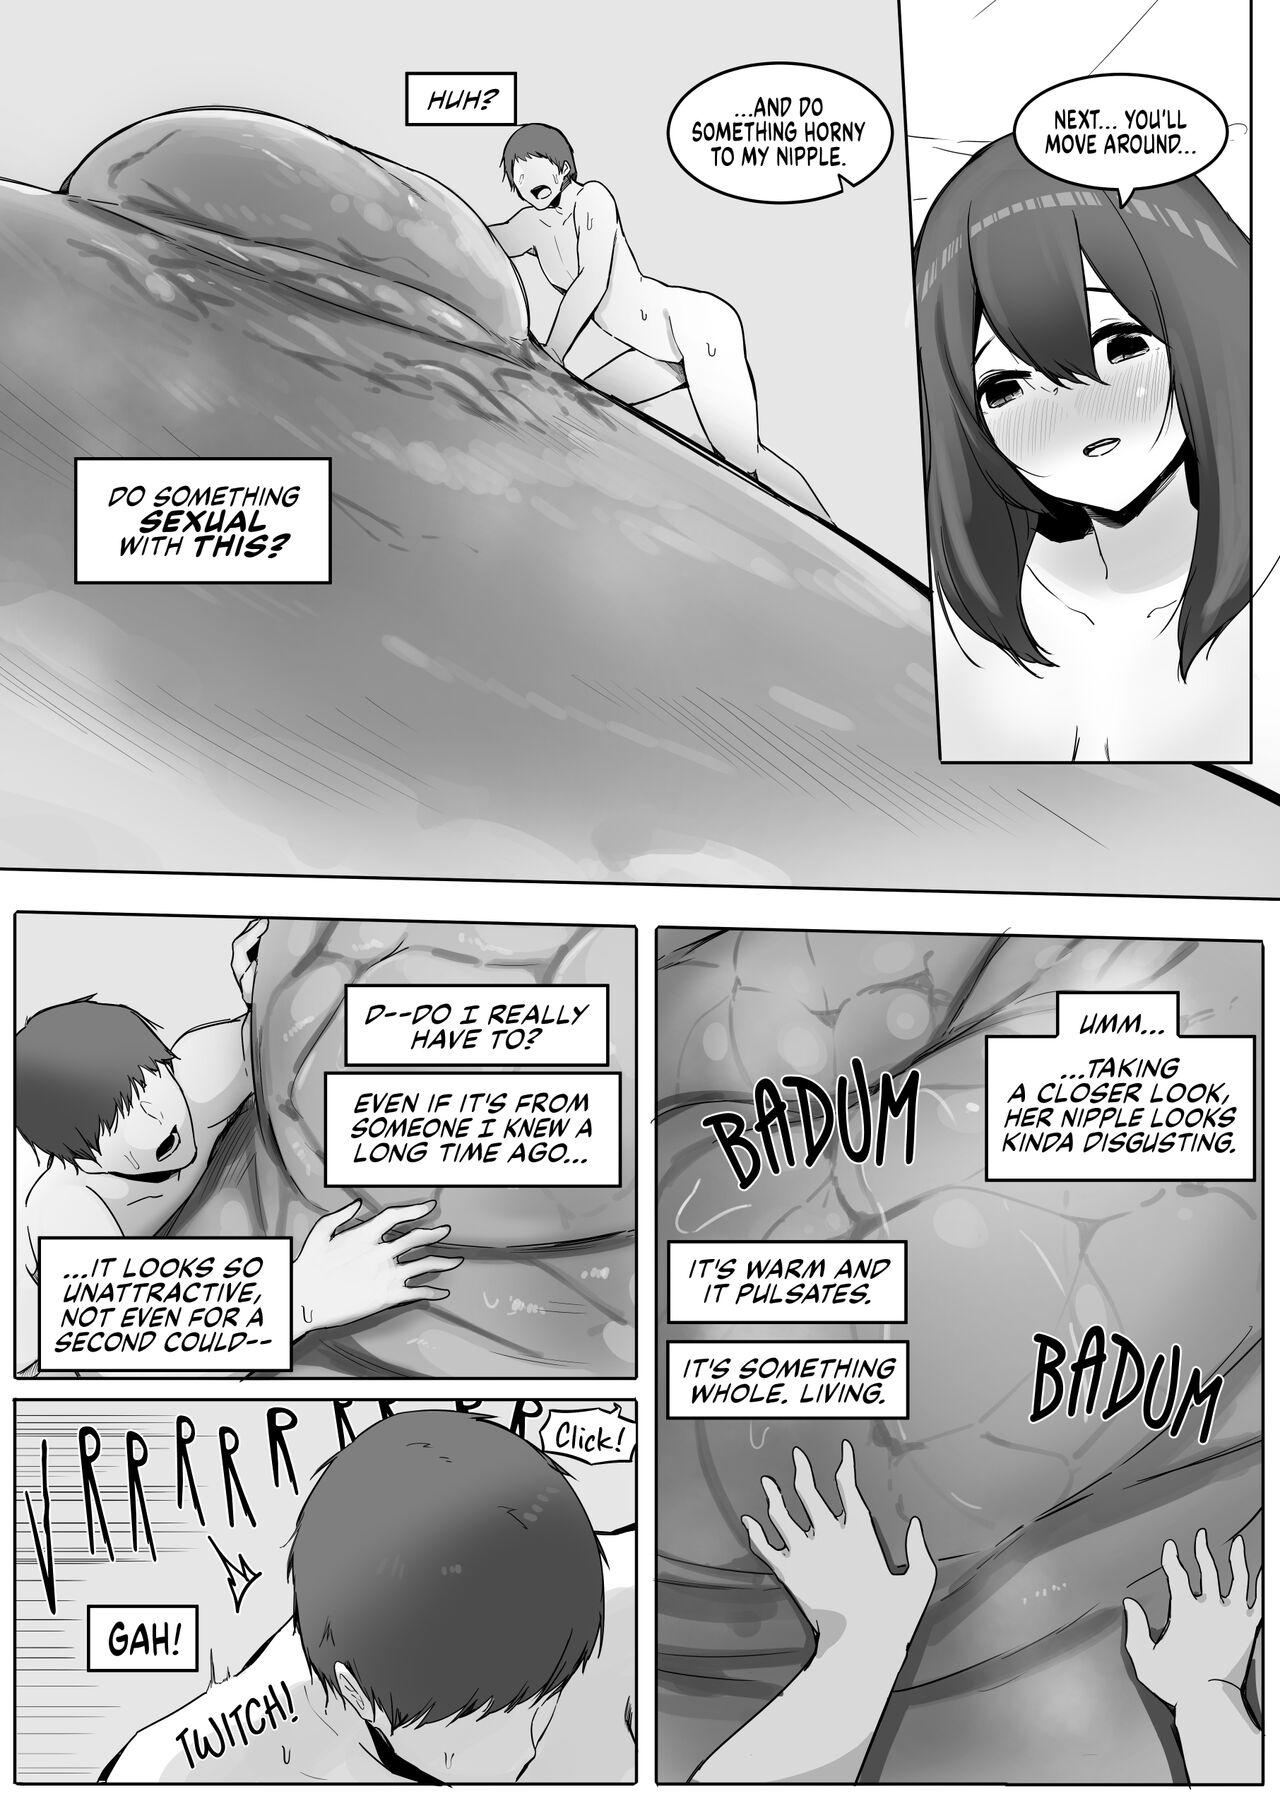 Linda A Tale Of When I, A Tiny, Was Bought By A Silent Acquaintance From When We Were In University 2 Camgirl - Page 11